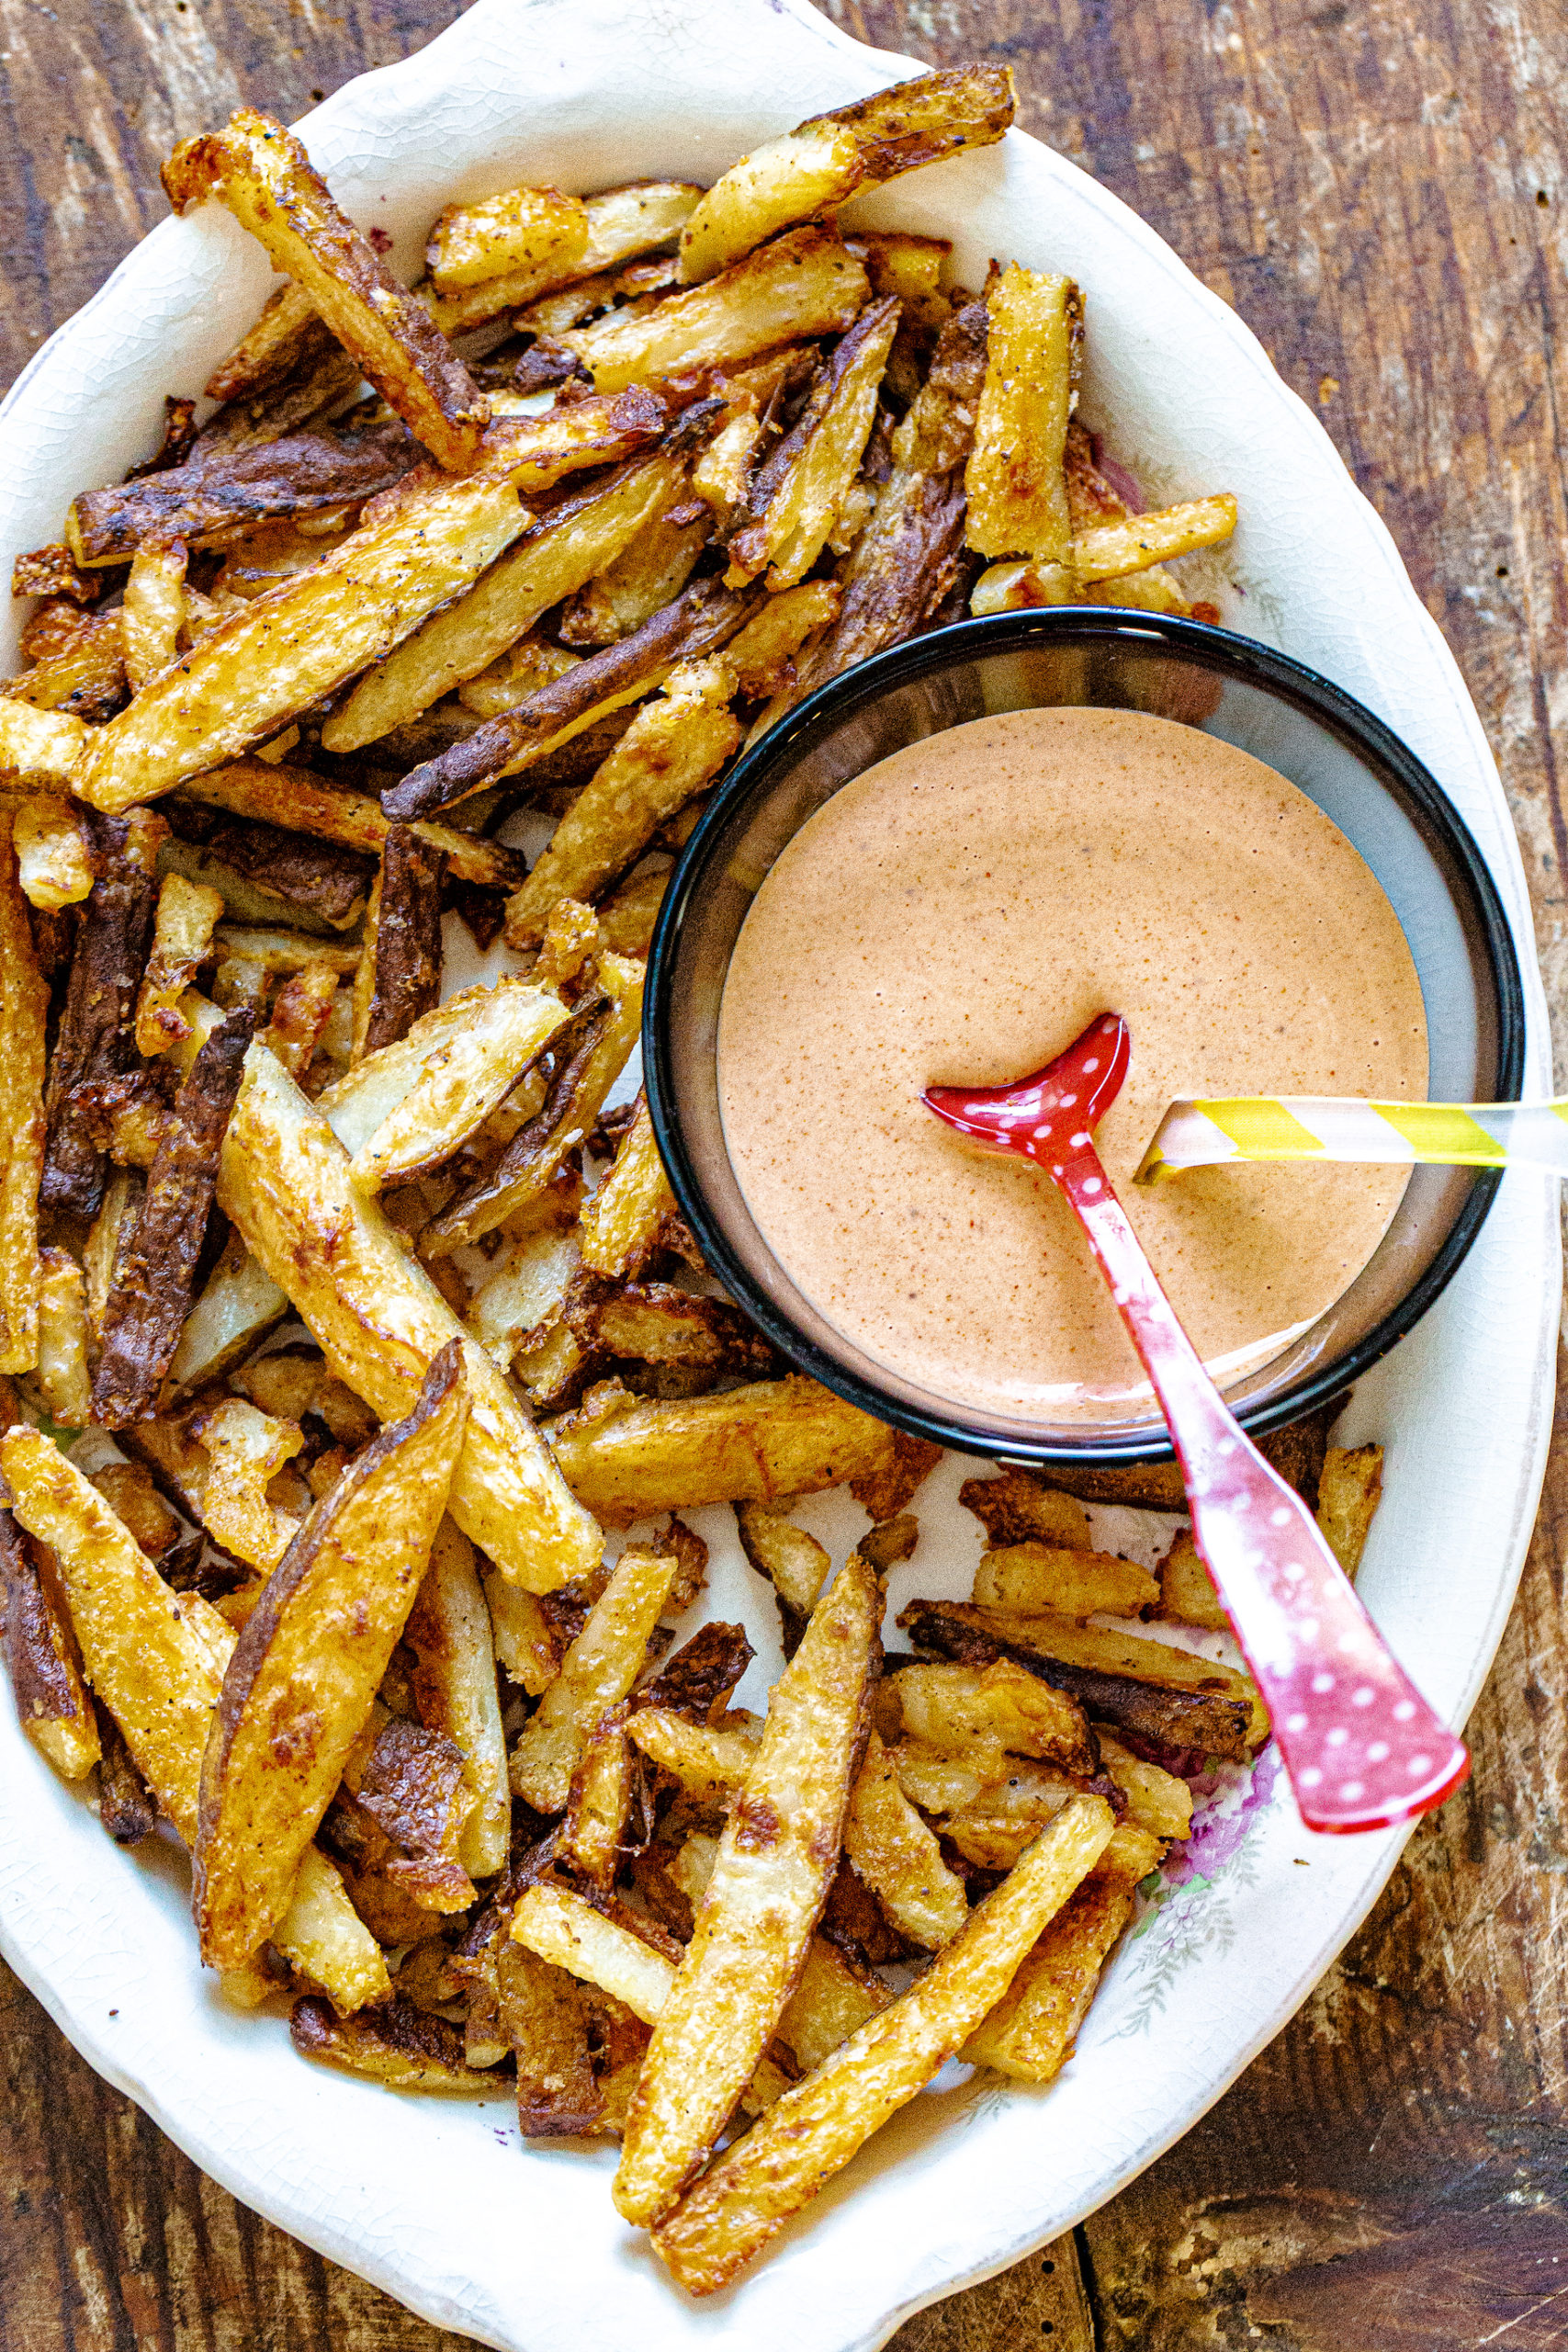 How to Make Baked French Fries (Crispiest Method!)